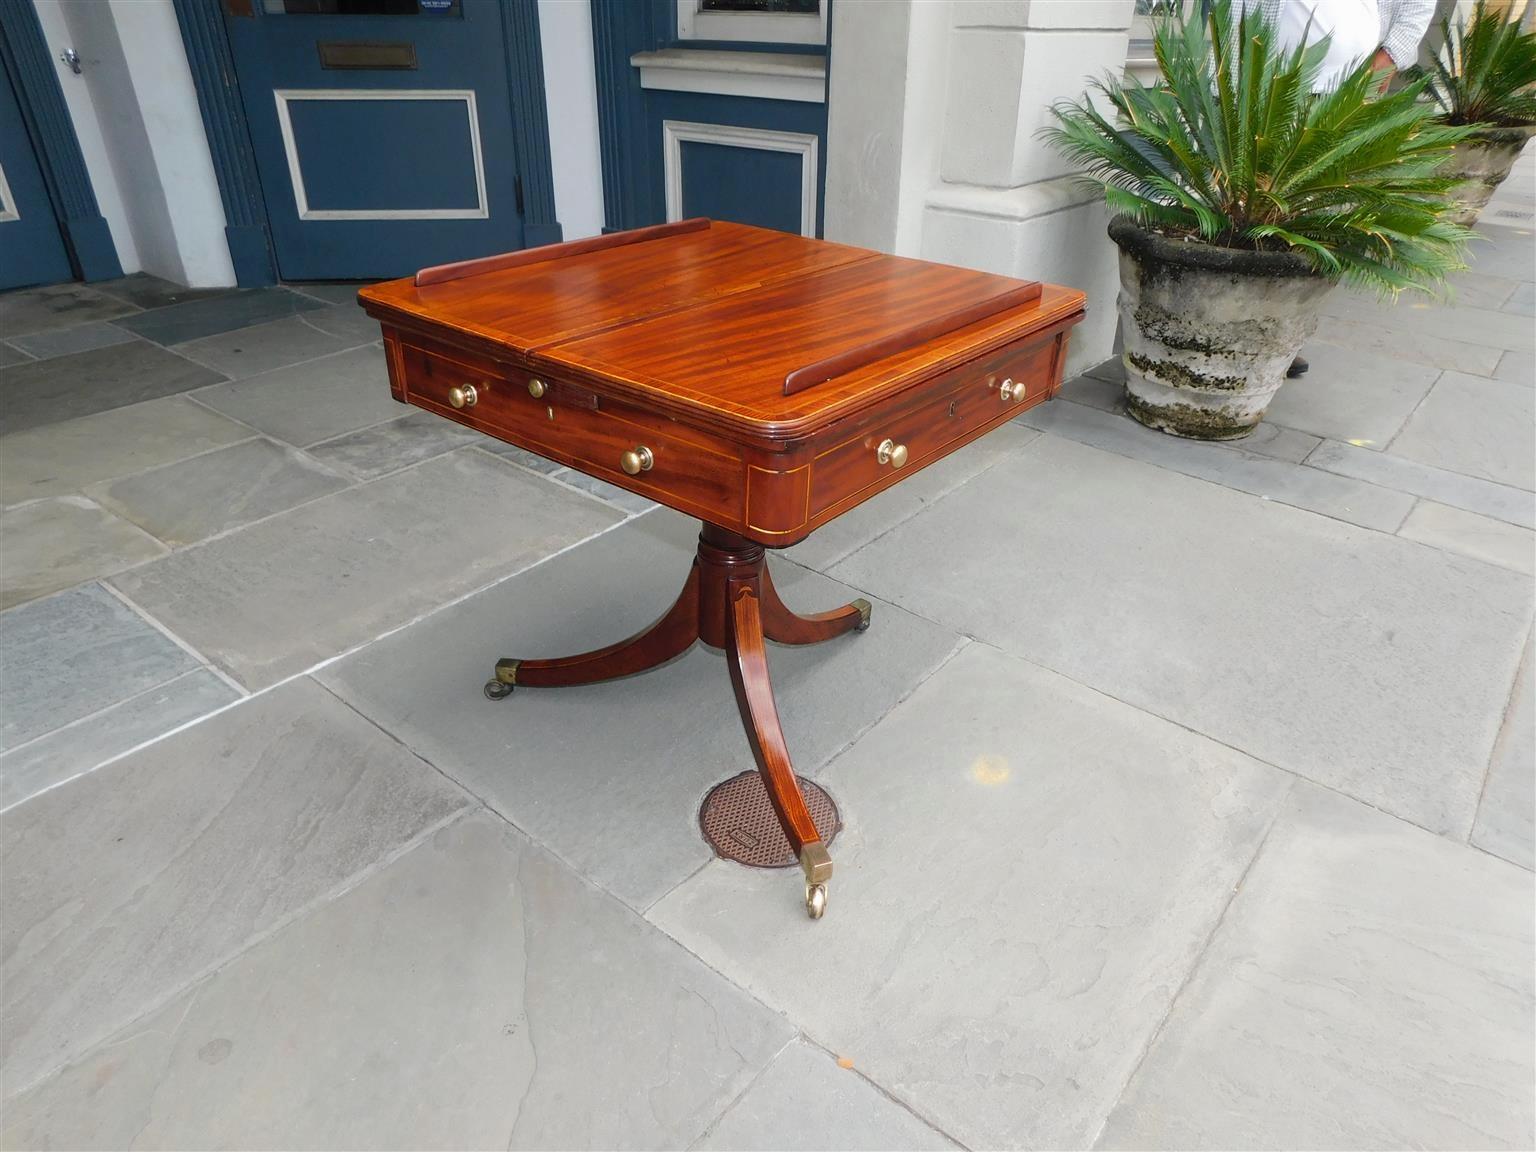 English Regency mahogany satinwood and ebony inlaid one drawer reading table with a ratcheted leather top, cross banded tulip wood, flanking candle slides with original brasses, compartmentalized fitted interior, centered ringed column, and resting